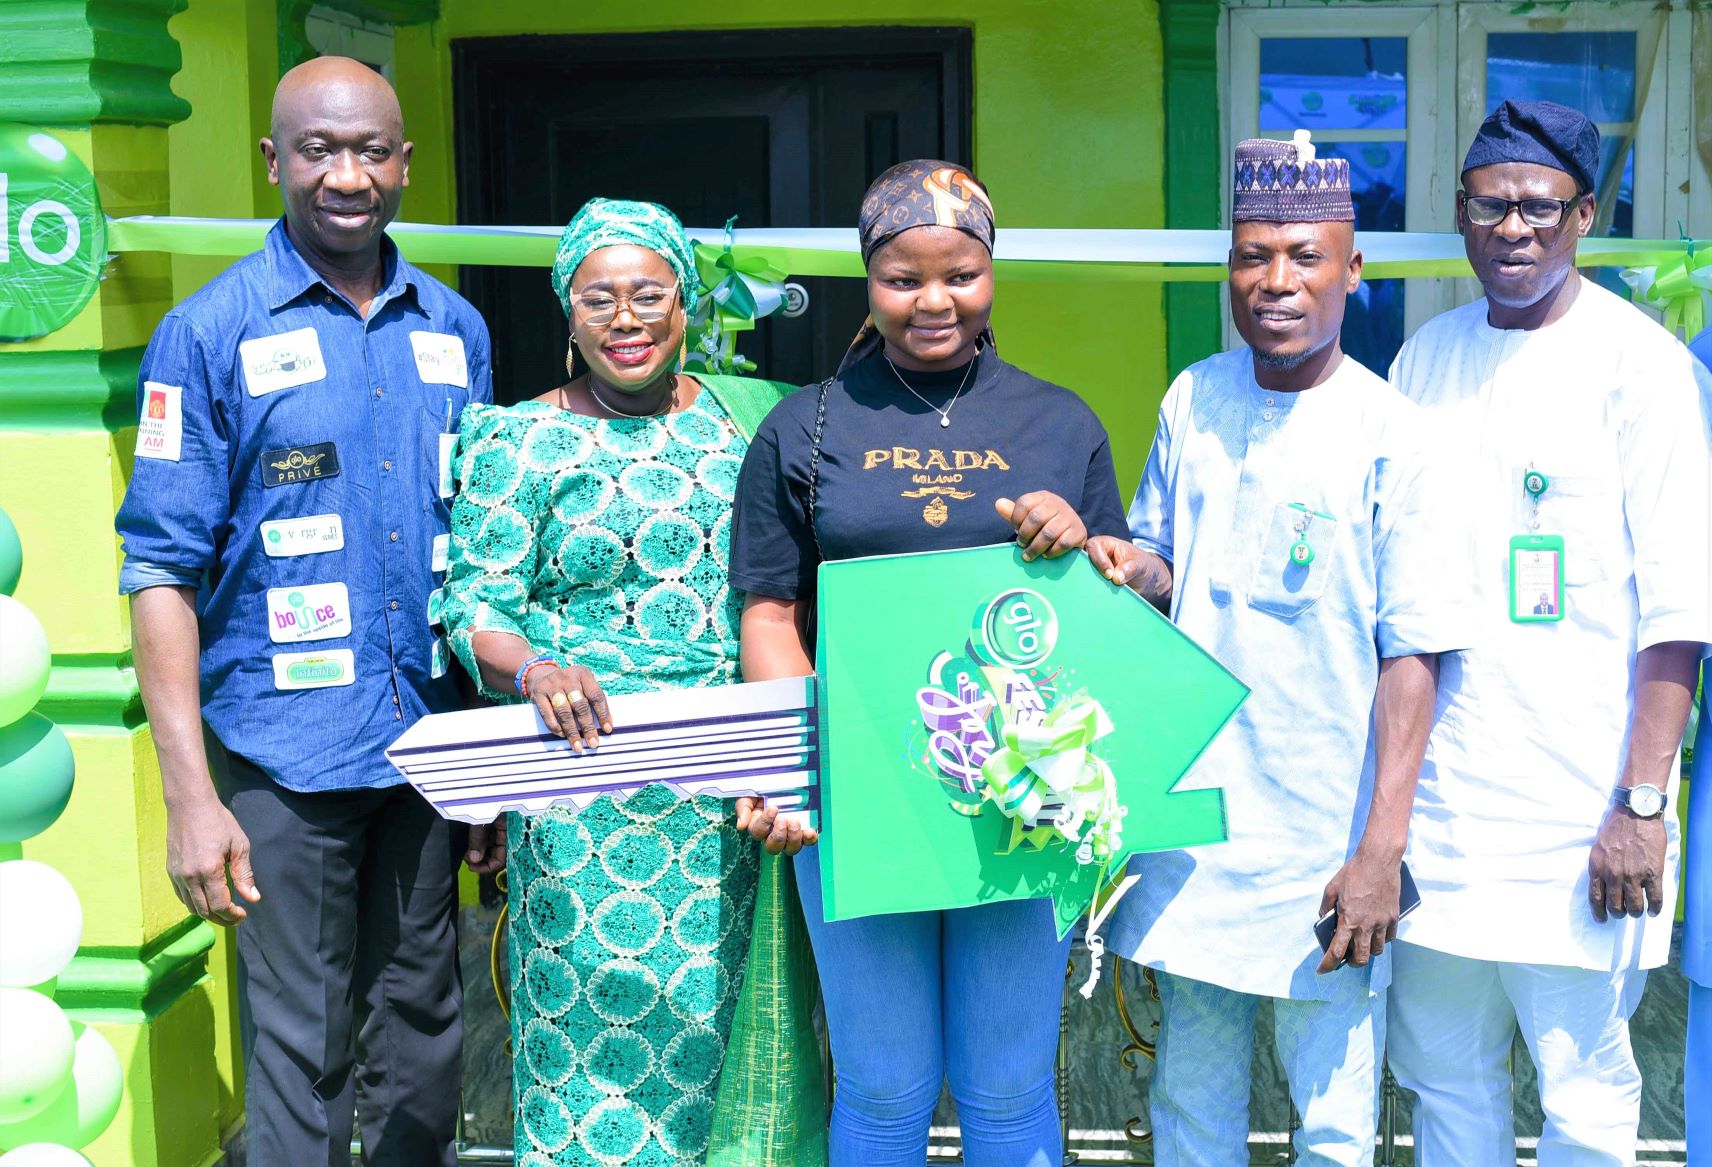 “I never saw this coming!” Ibadan Glo Festival of Joy house winner exclaims